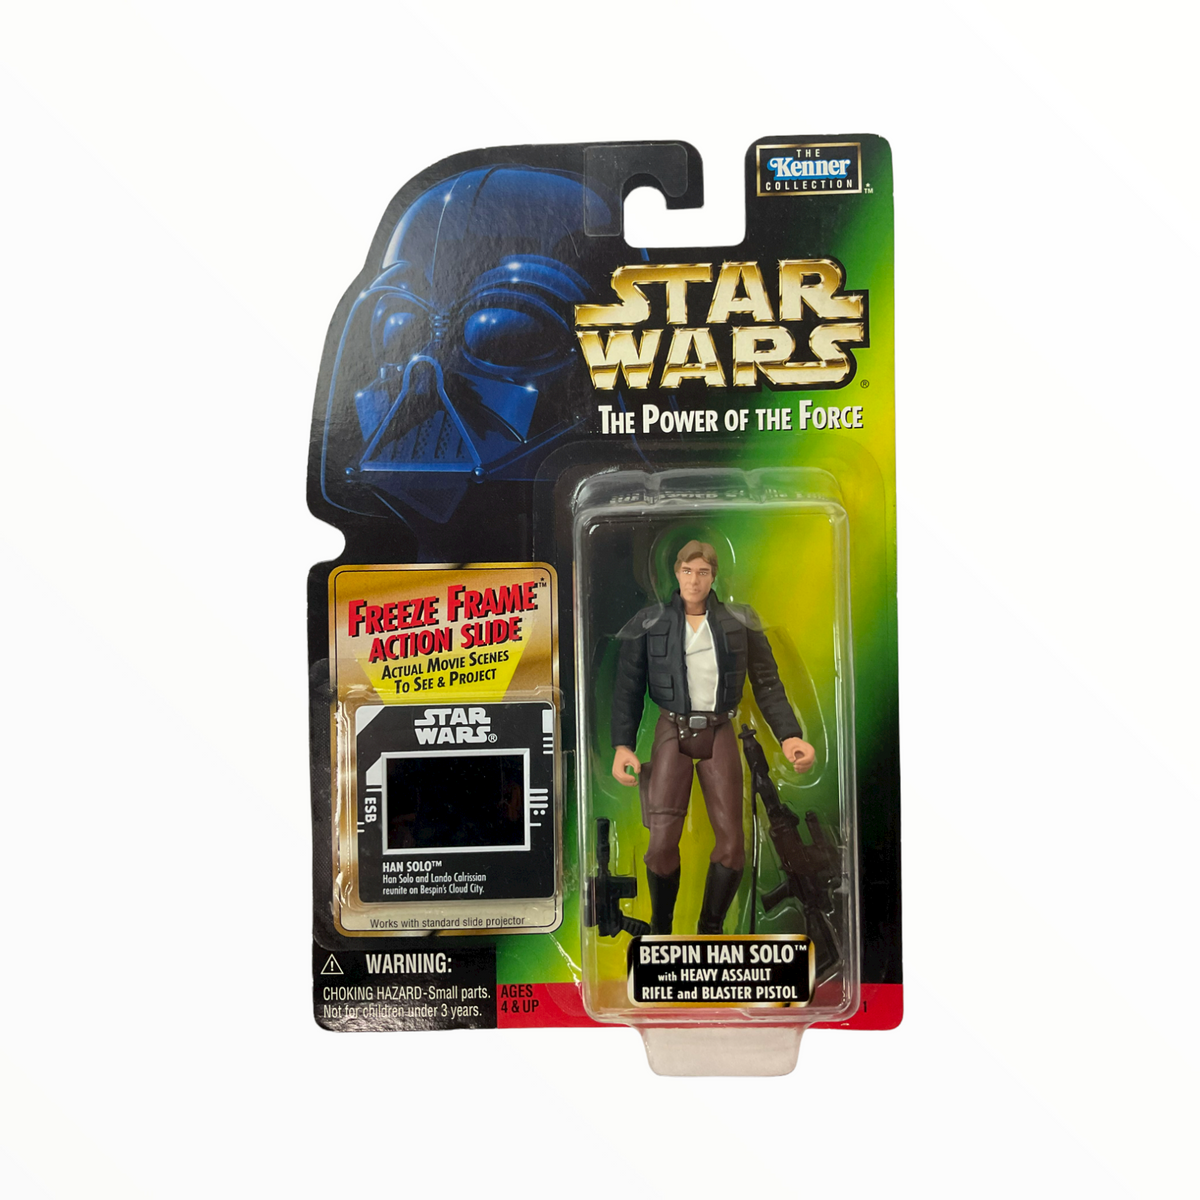 Star Wars The Power of the Force Green Card Bespin Han Action Figure